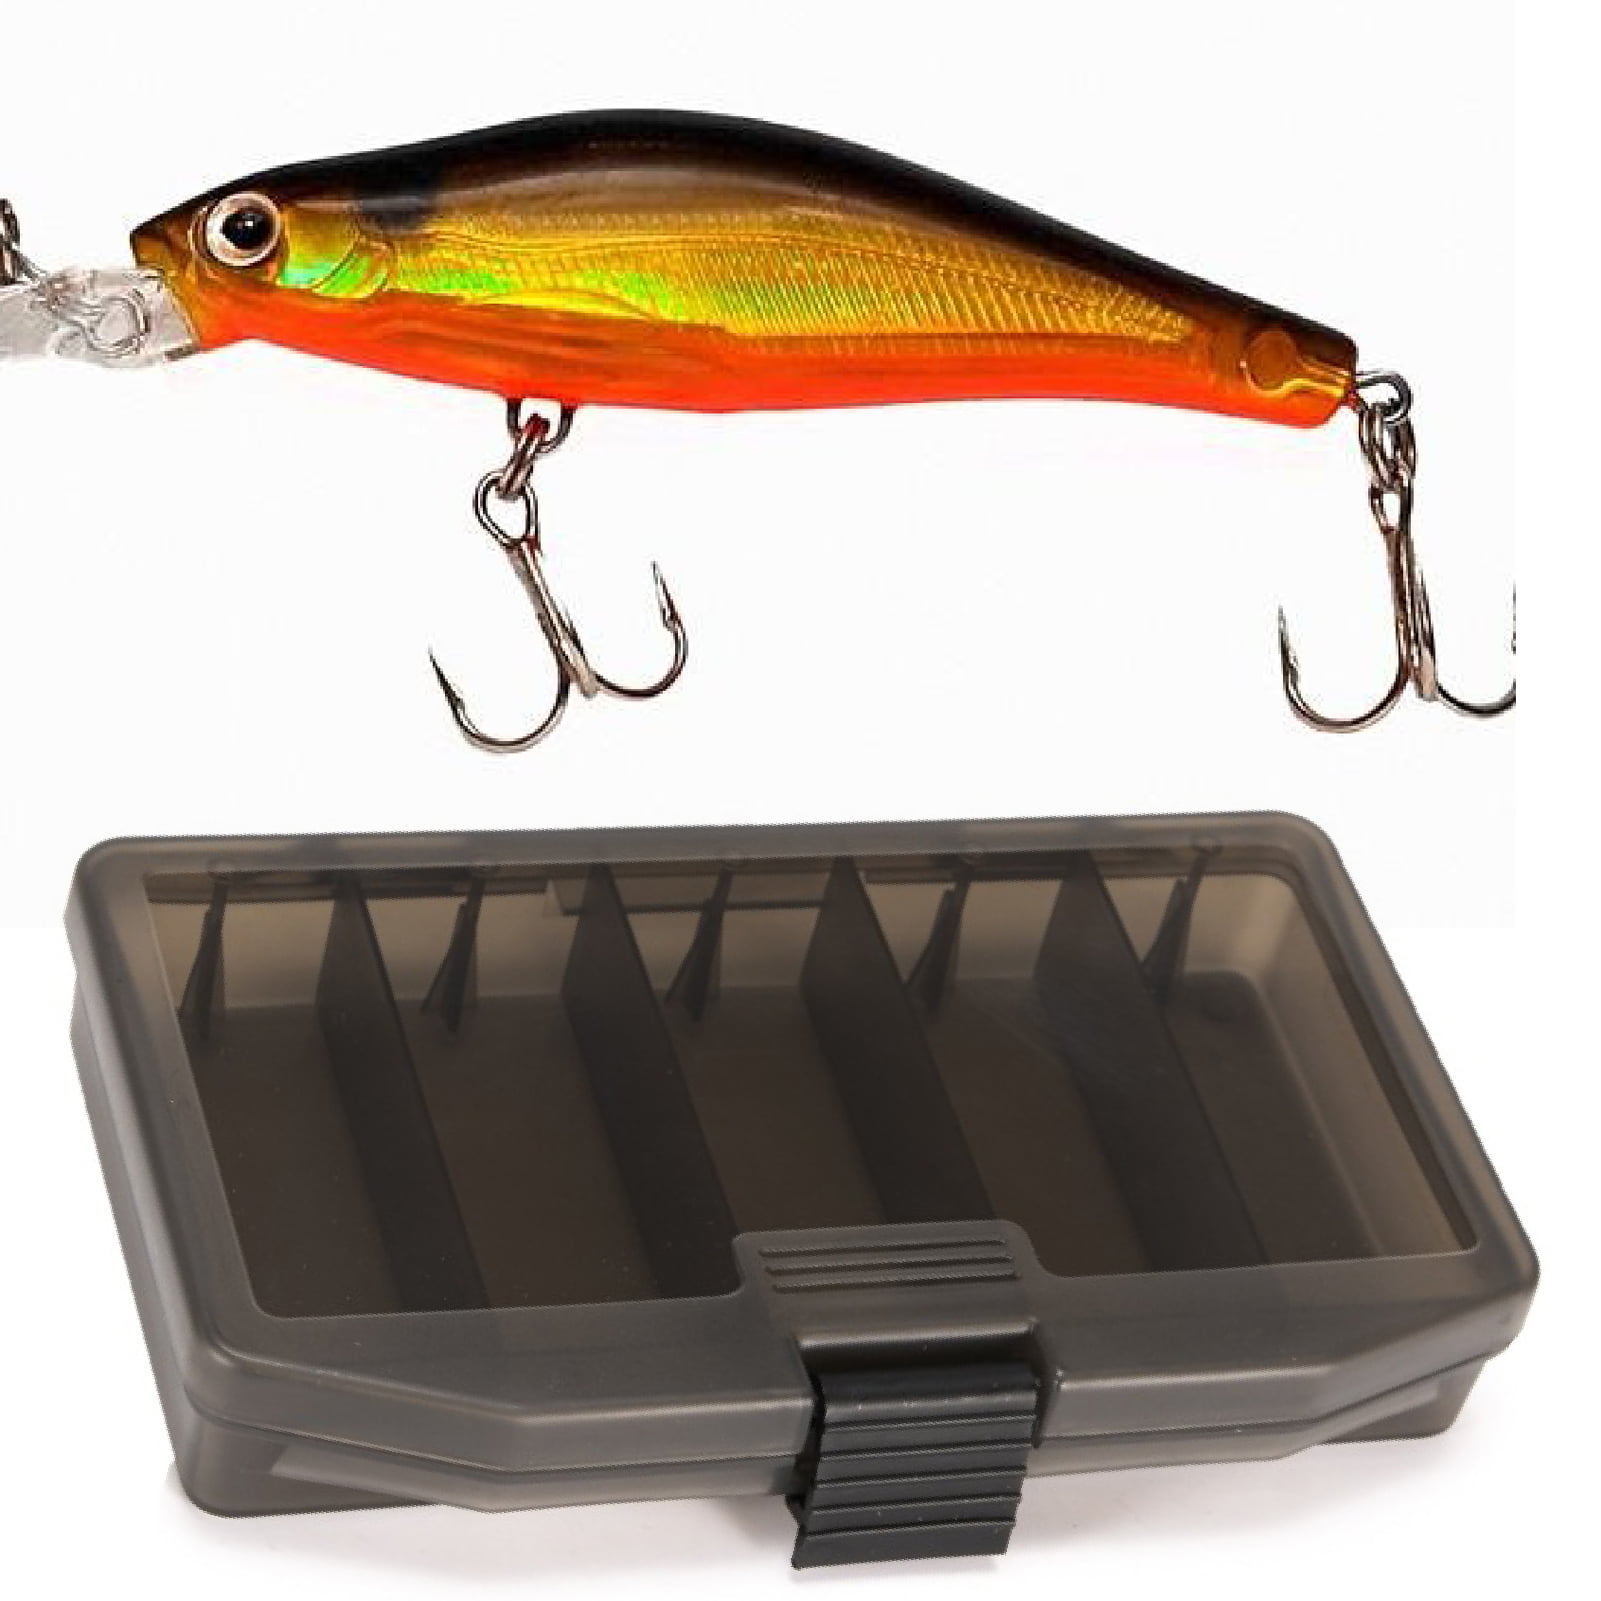 Small Fishing Lure Bait Tackle Storage Box Visible Waterproof Case Container